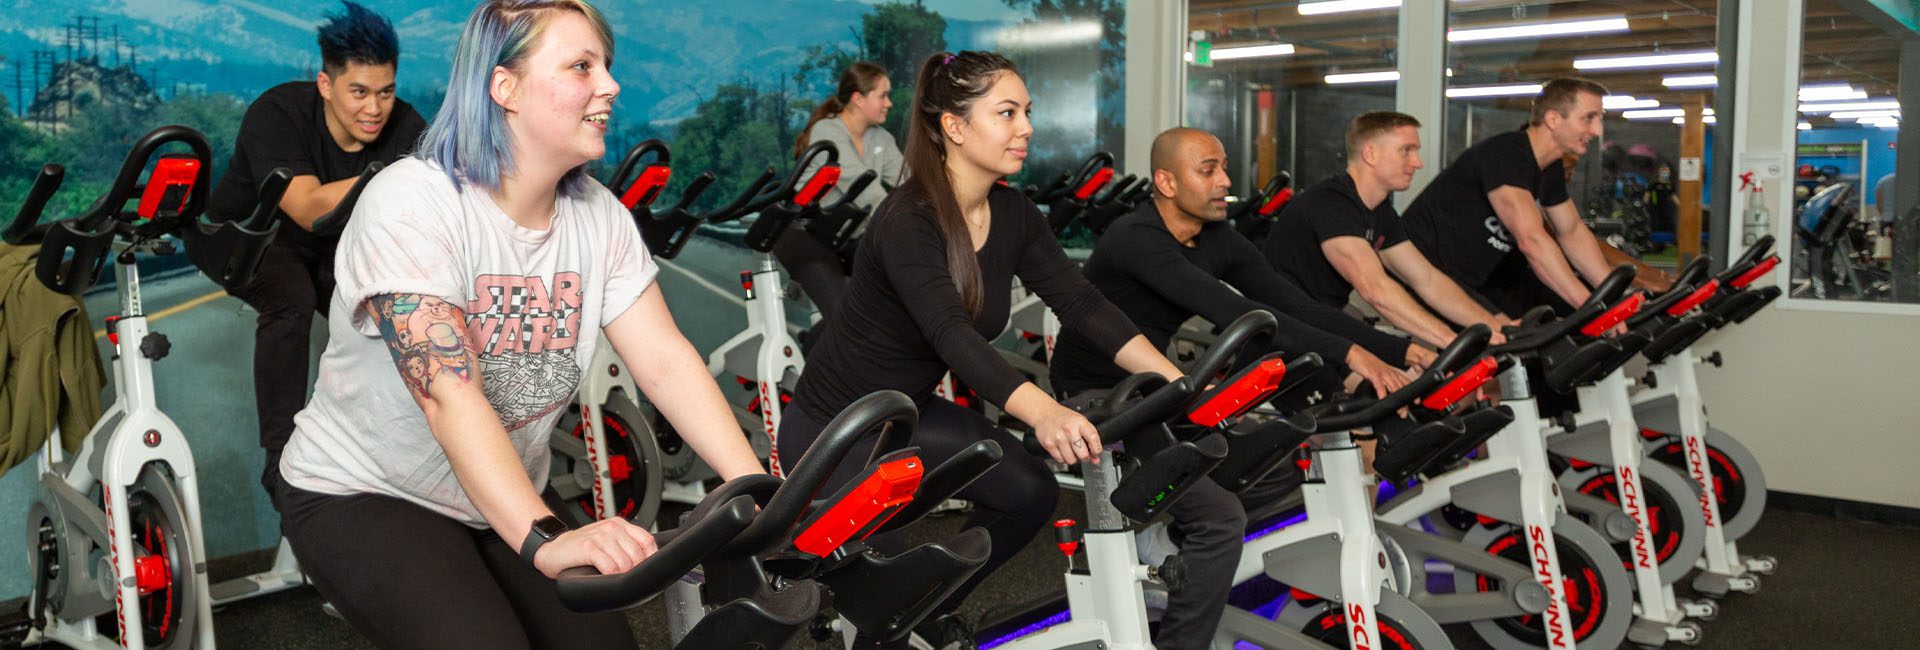 group of people in a spin class